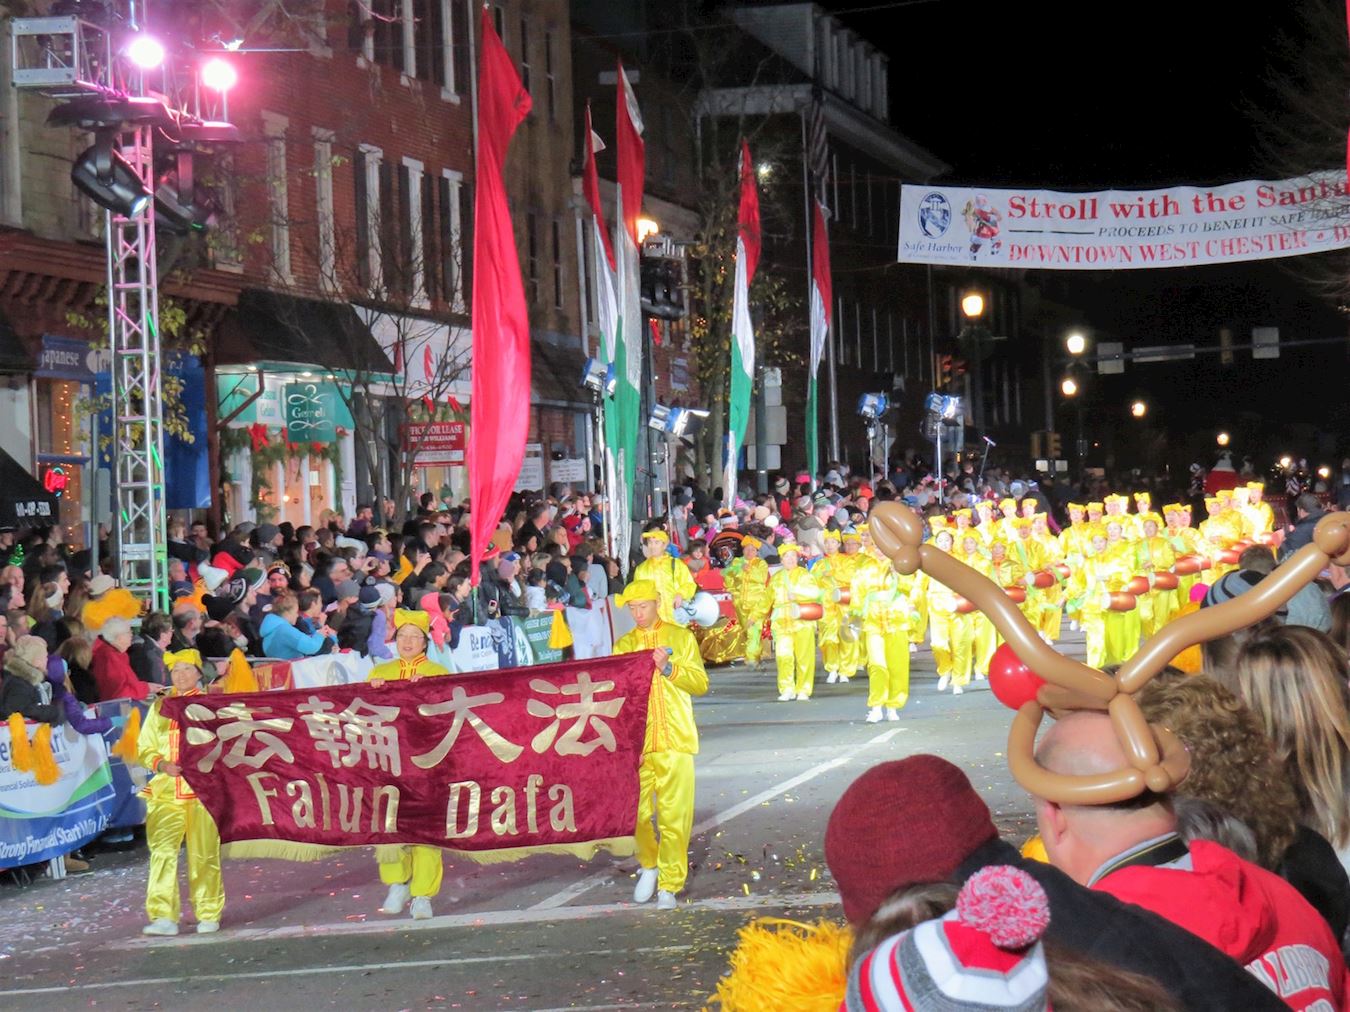 Image for article Traditional Holiday Parades in the United States Have Welcomed Falun Dafa Throughout the Years